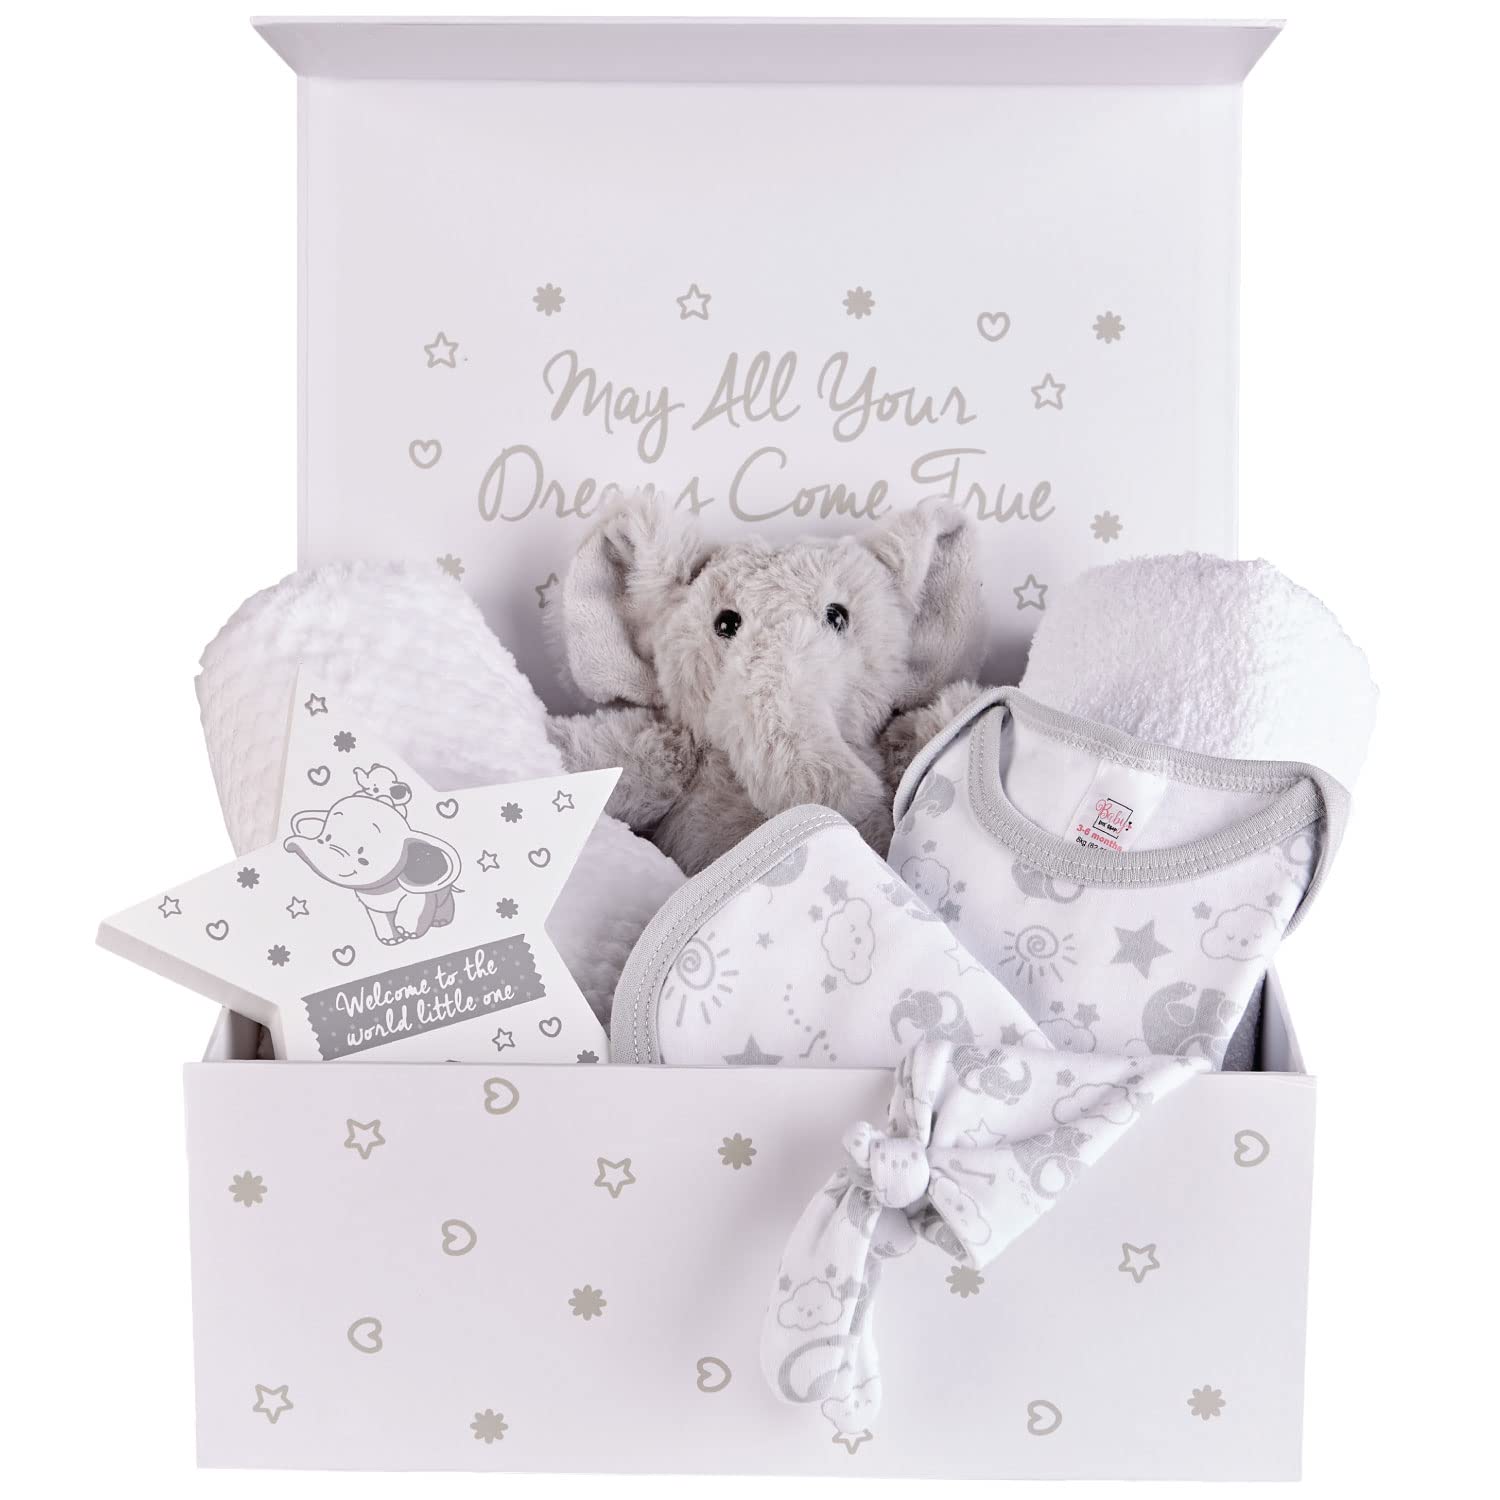 Unisex Baby Gift Set - Unique Magnetic Box That Includes a Wrap Blanket, Hooded Towel, Soft Elephant Toy, Bib and Hat. A Great Shower Gift for New Baby Boys and Girls